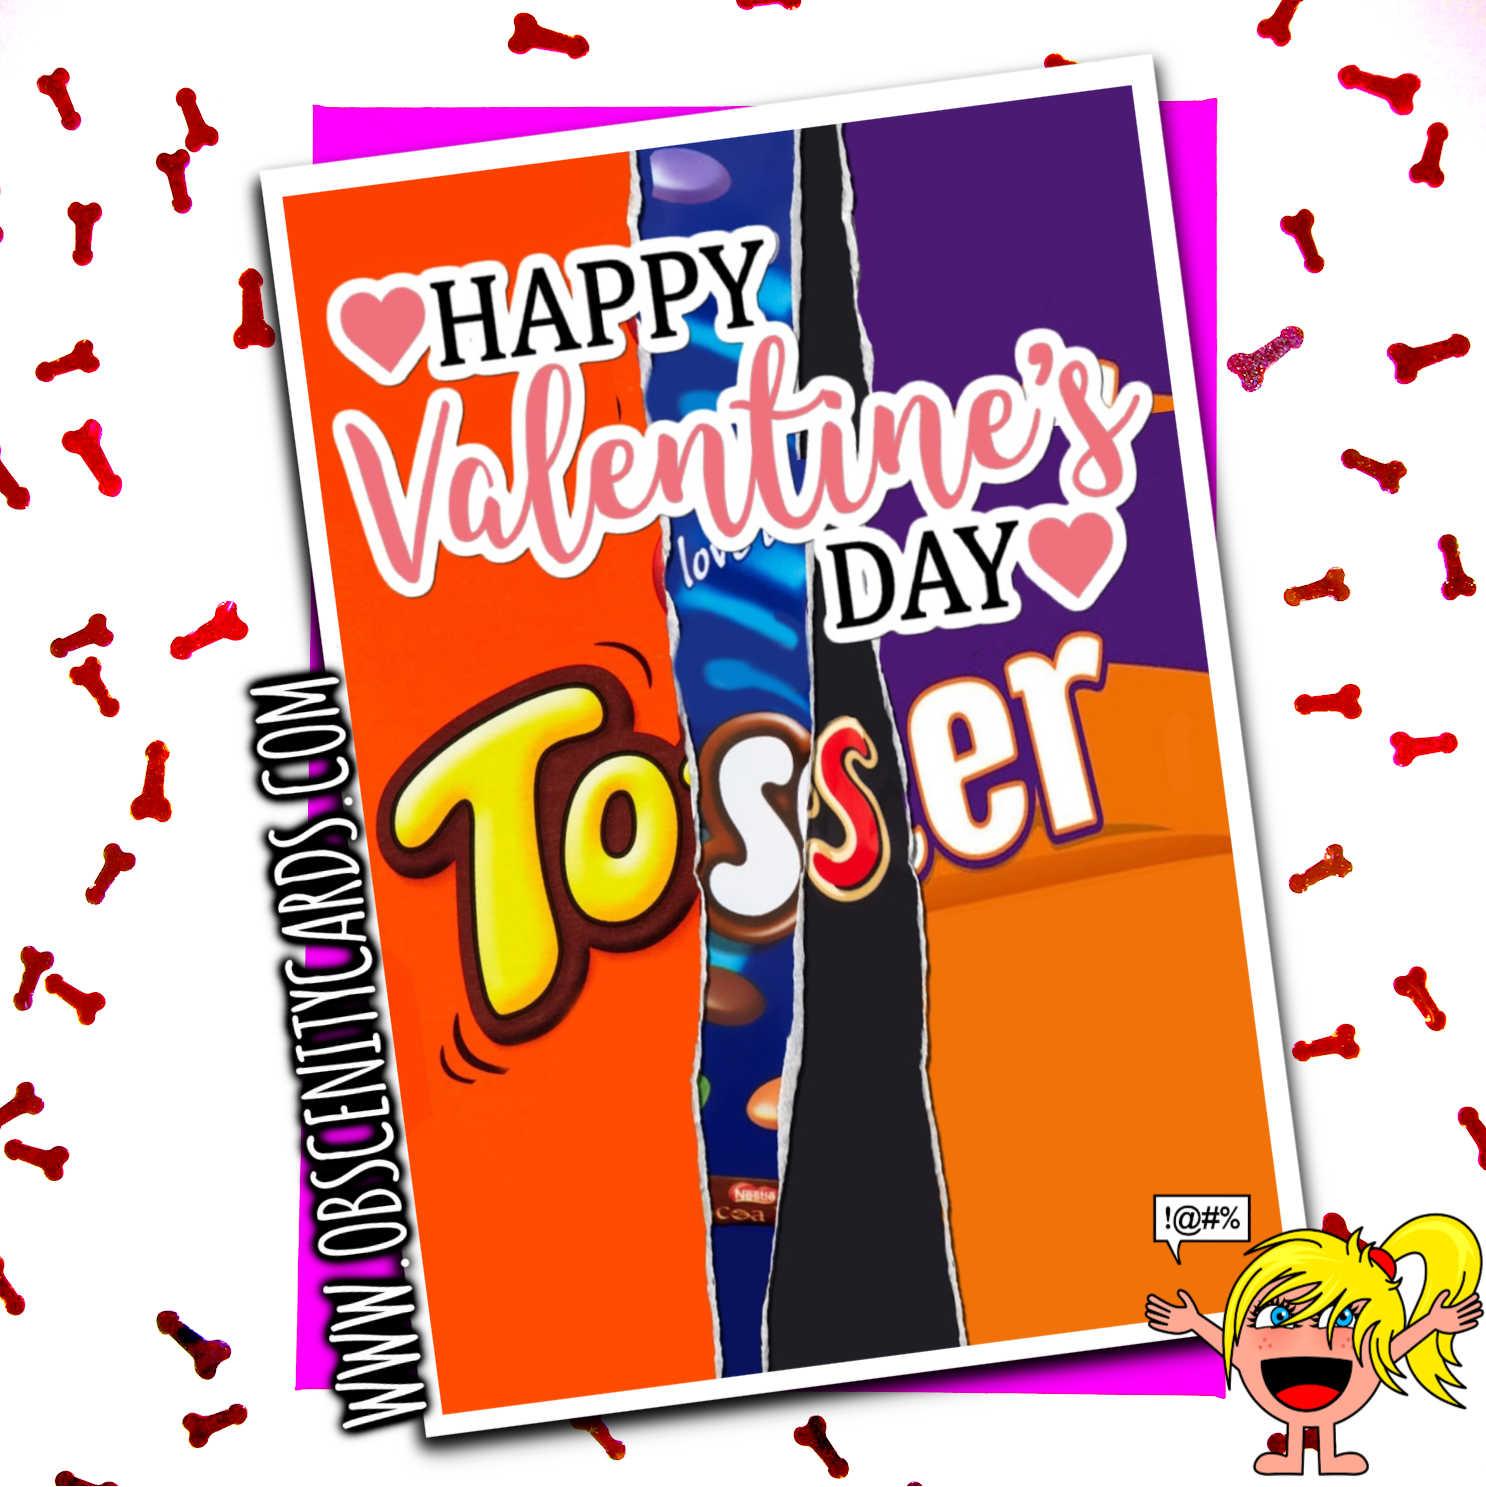 HAPPY VALENTINE'S DAY TOSSER CHOCOLATE WRAPPER FUNNY VALENTINES CARD